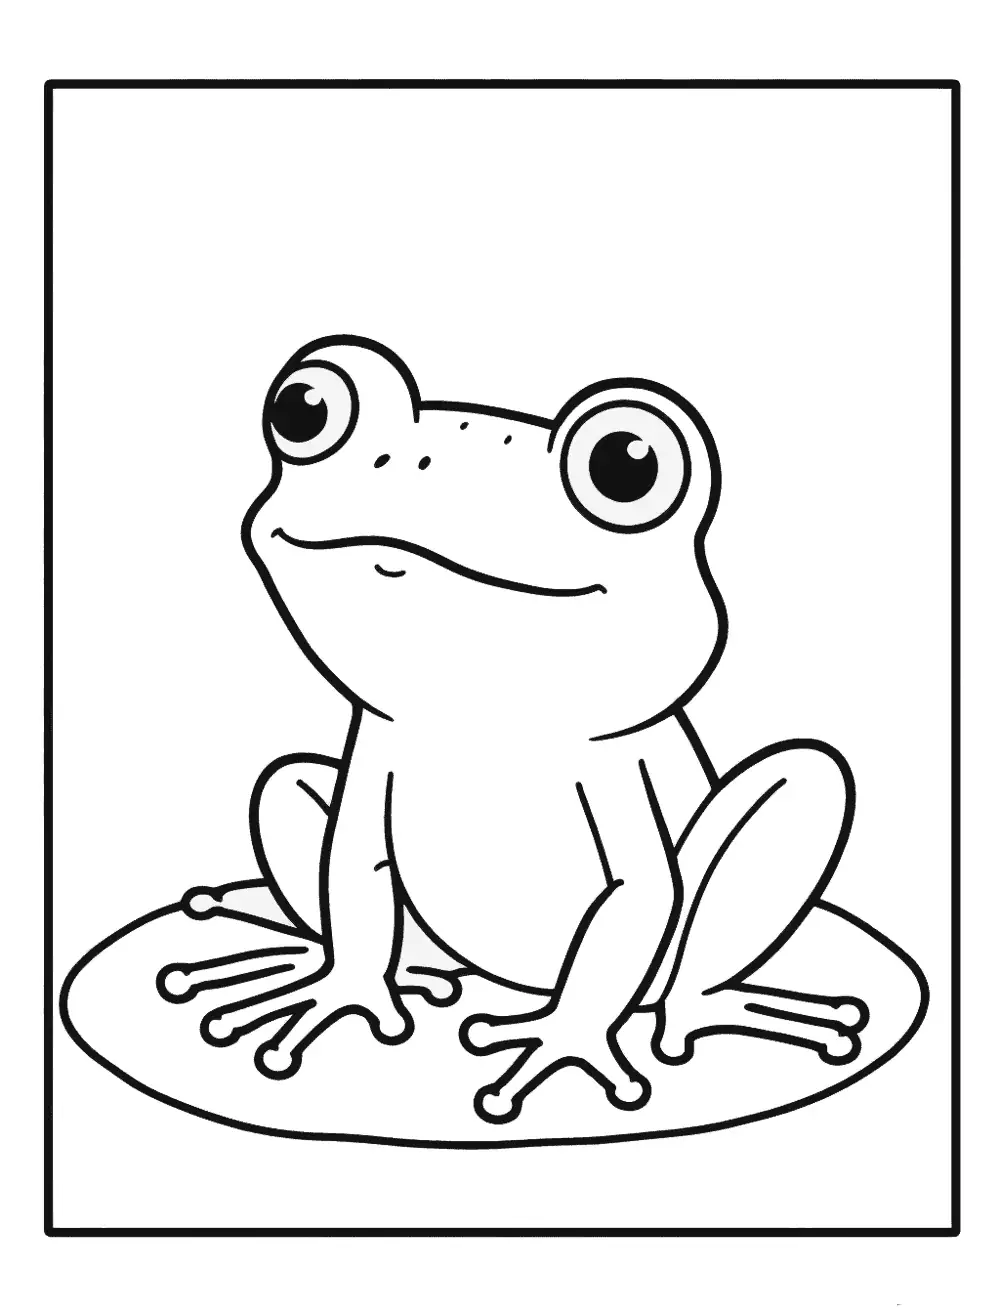 Easy Frog Coloring Page - A simple, easy-to-color frog for young kids.